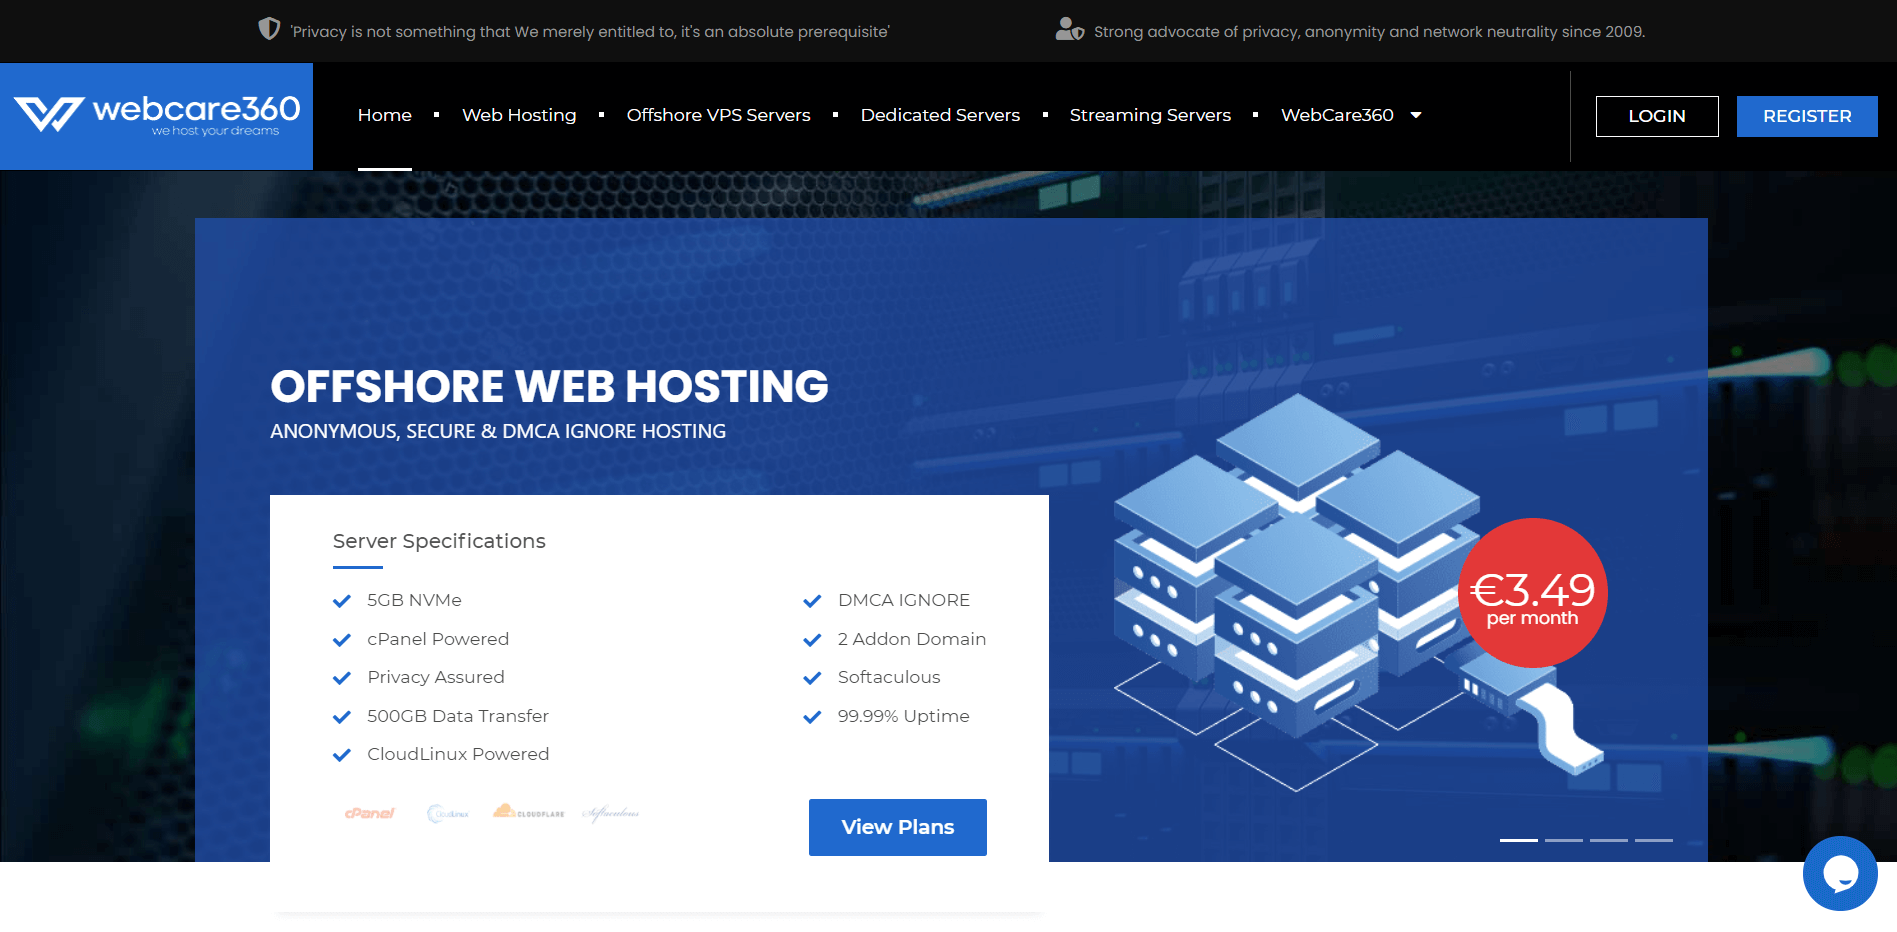 The homepage for Webcare360.